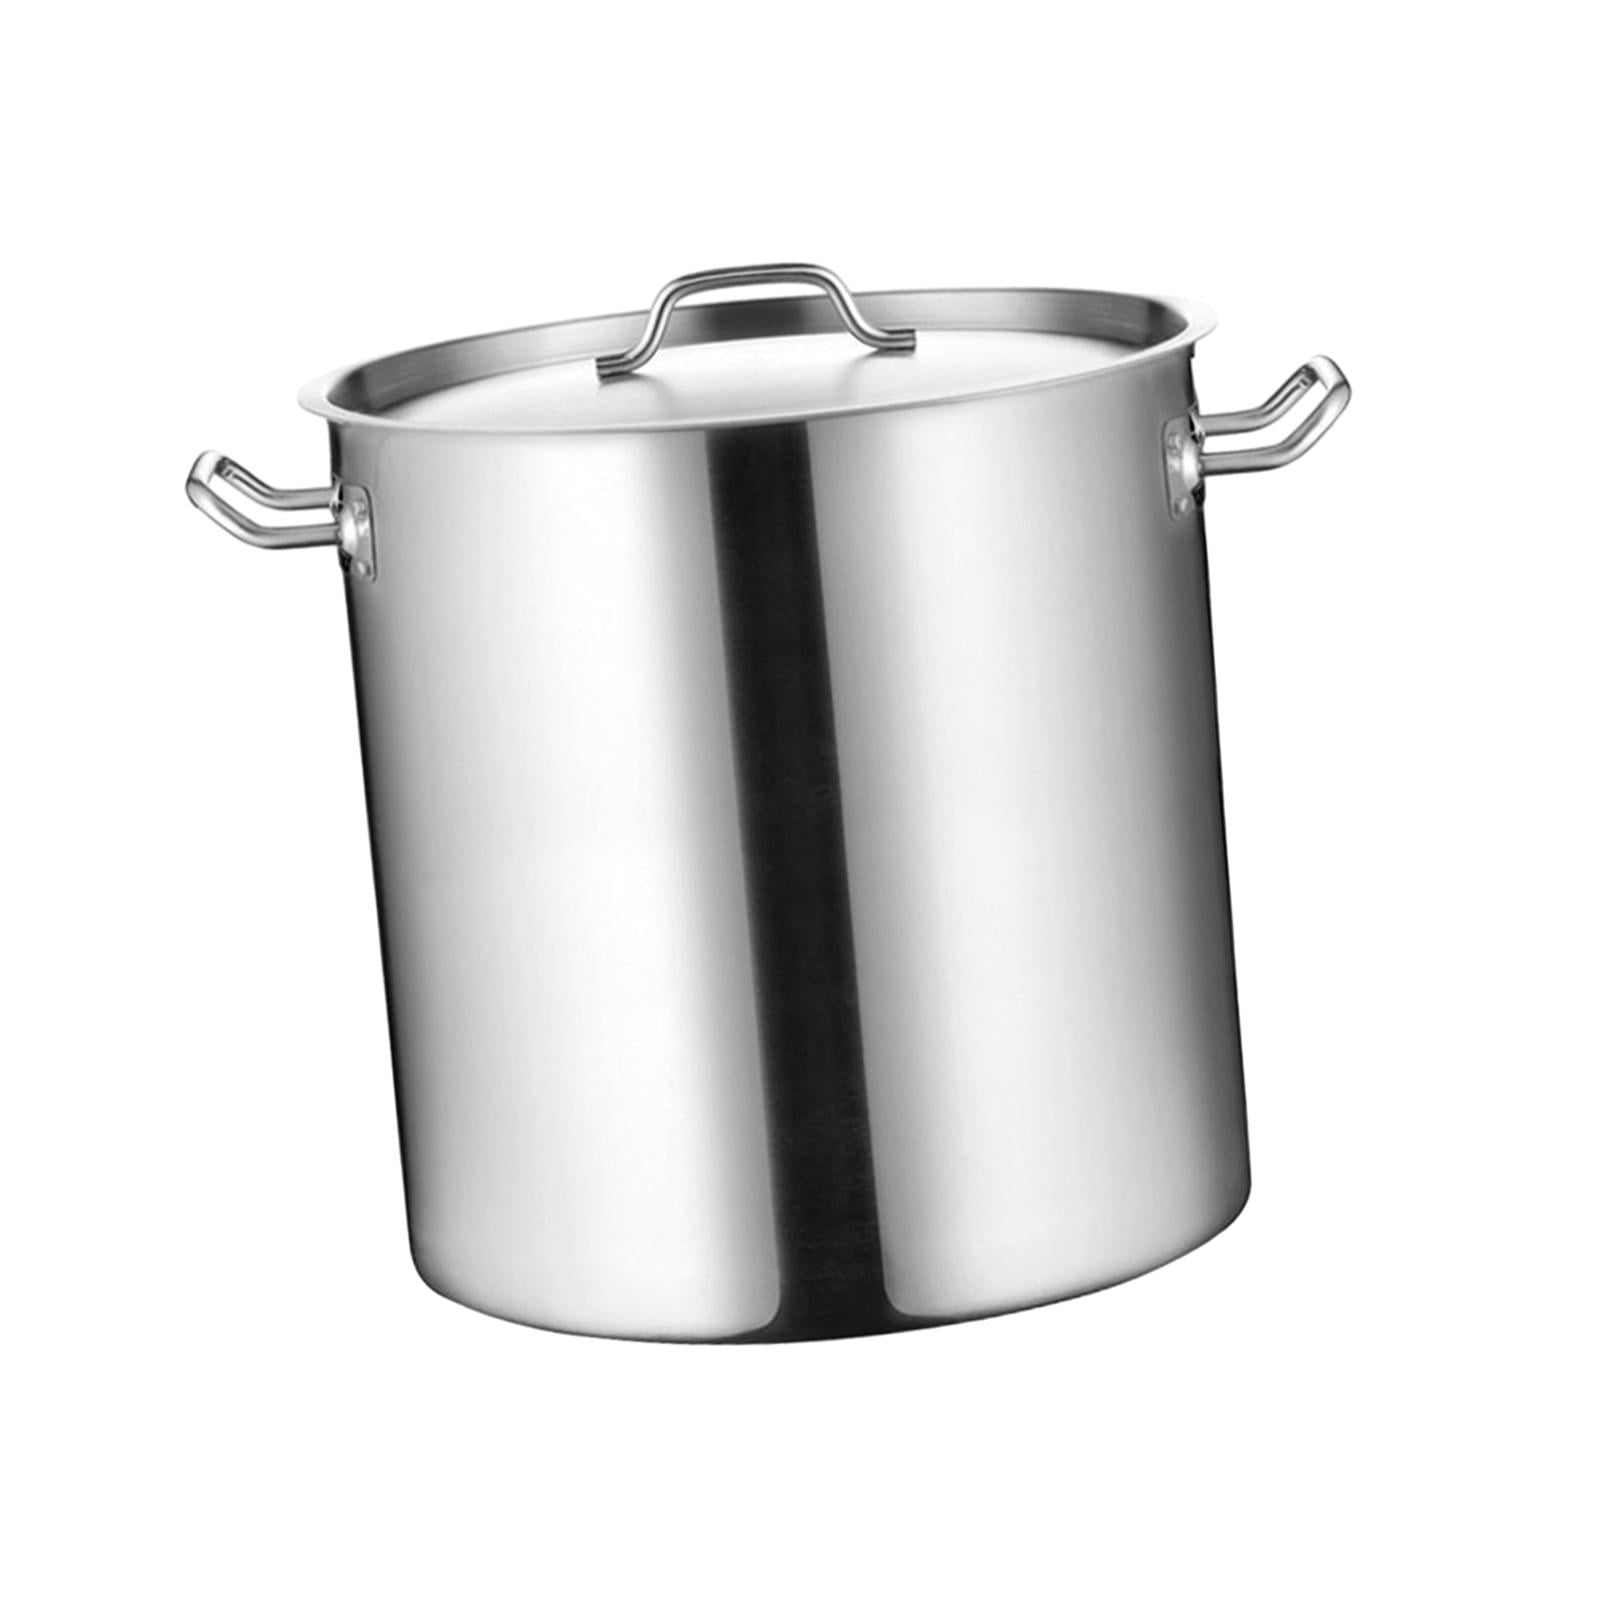 2-pack Stainless Steel Double Boiler, Heat-resistant Handle For Chocolate,  Butter, Cheese, Caramel